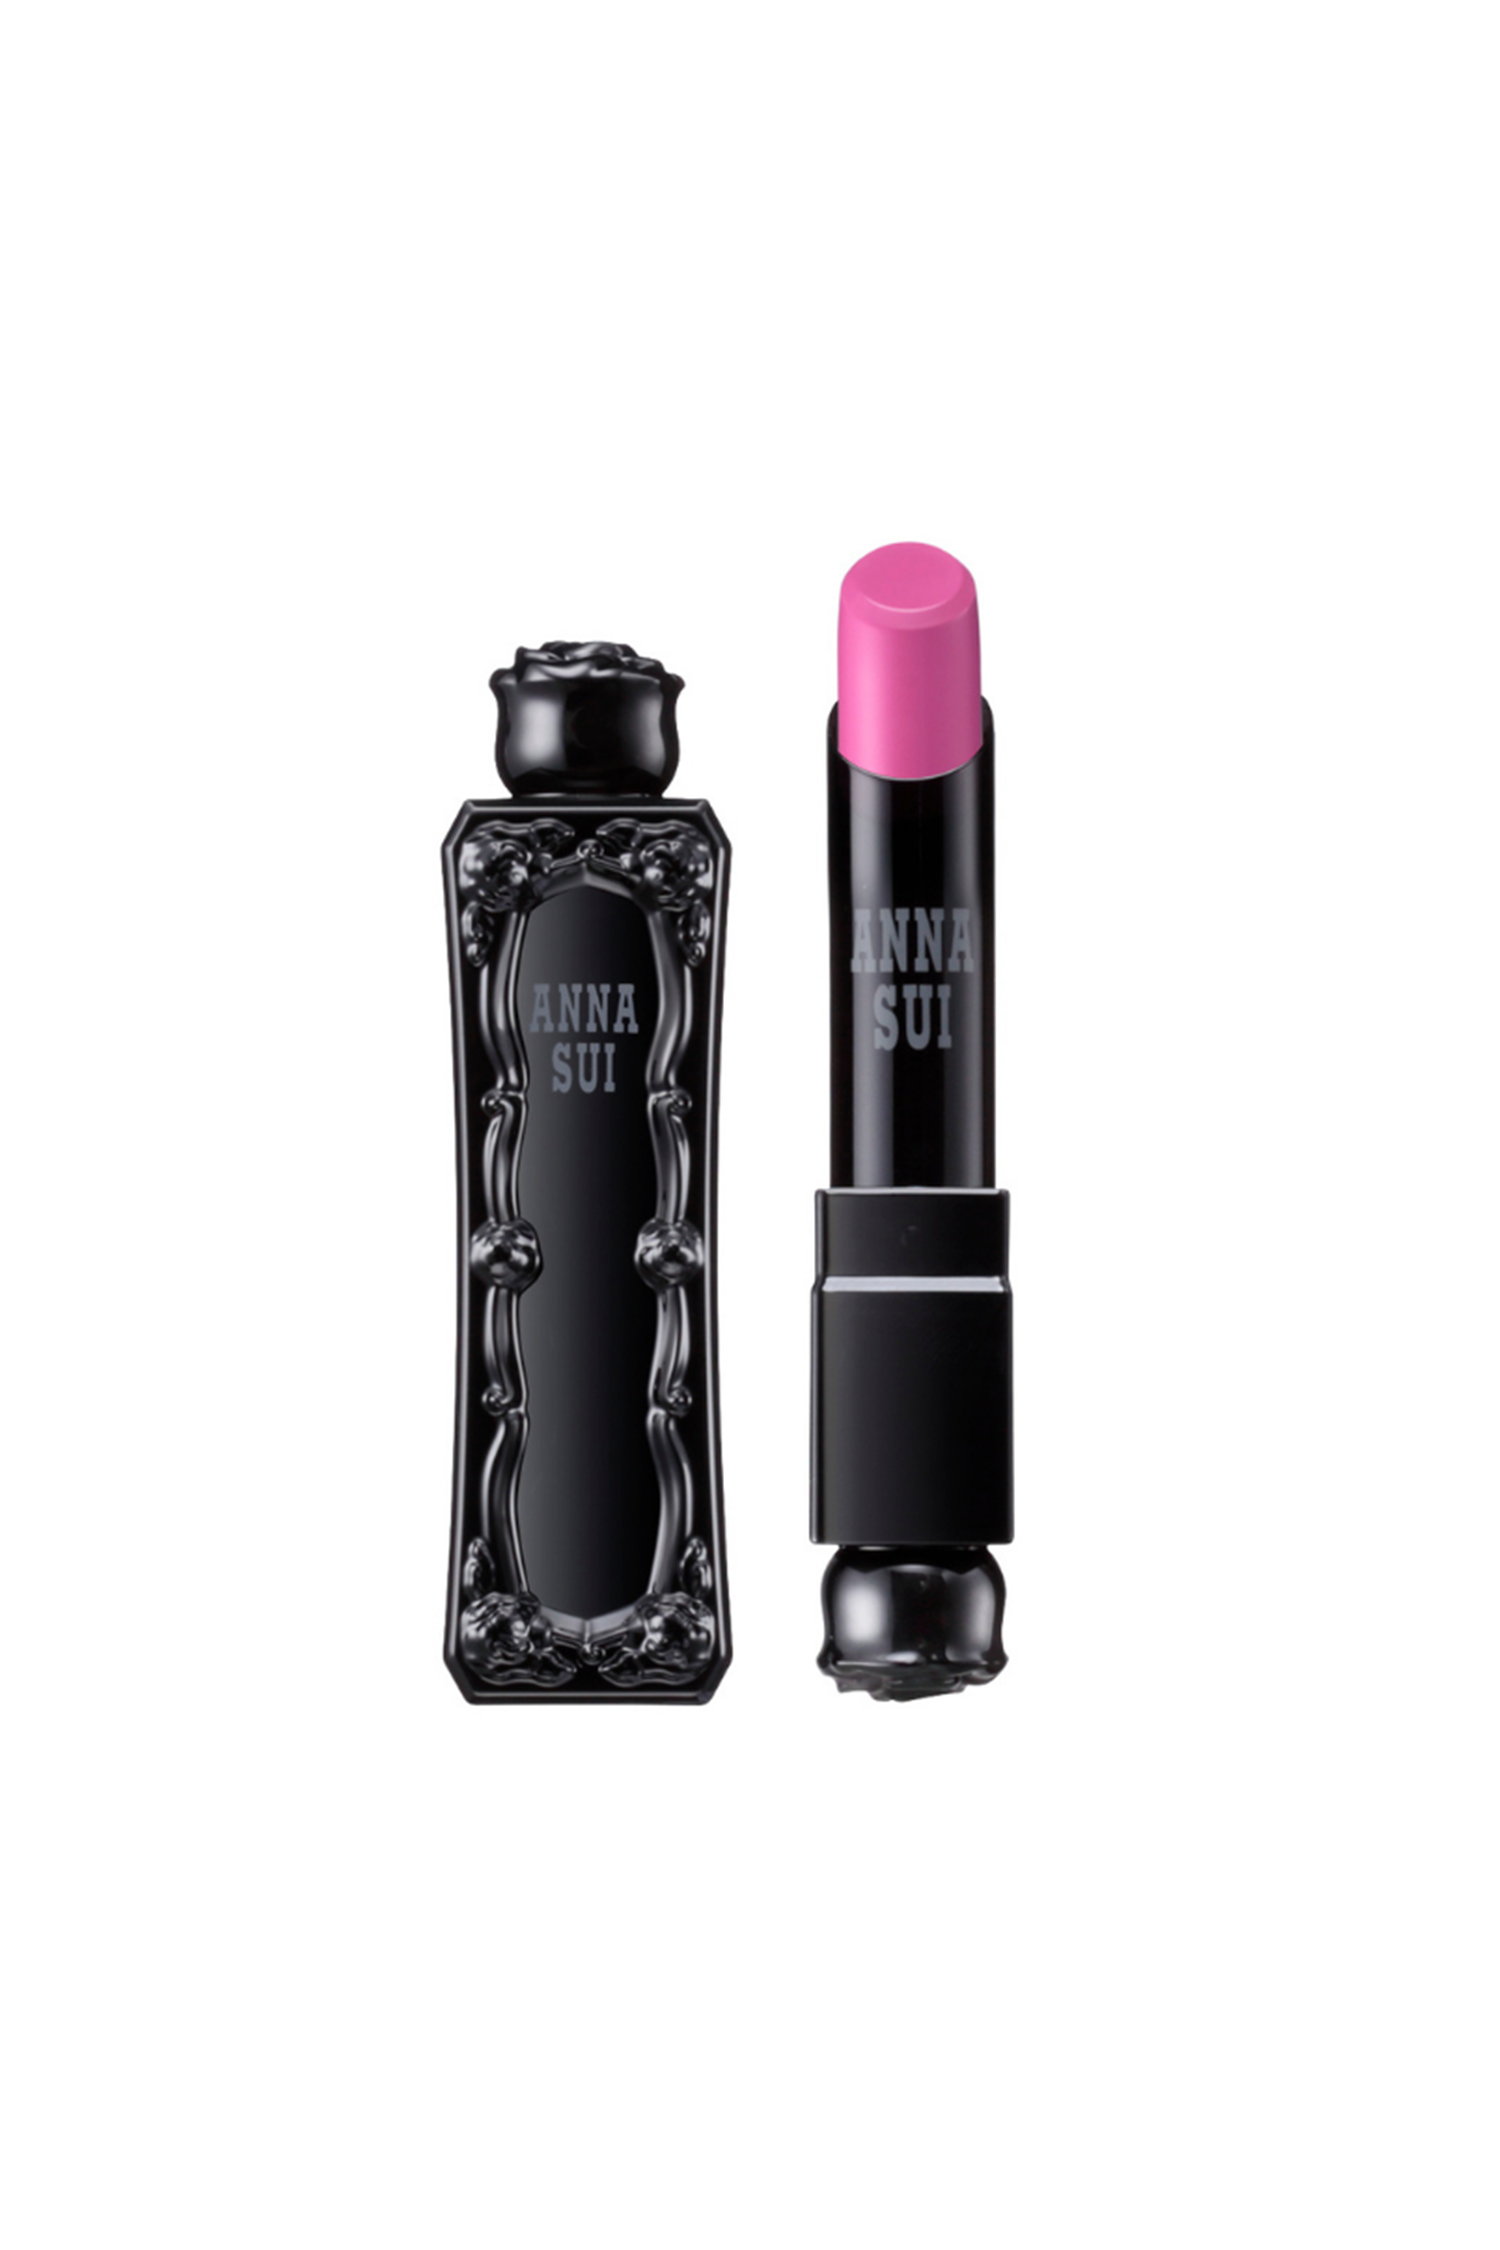 Fairy Pink lipstick, in an Anna Sui, black container with raised rose pattern, rose on top 